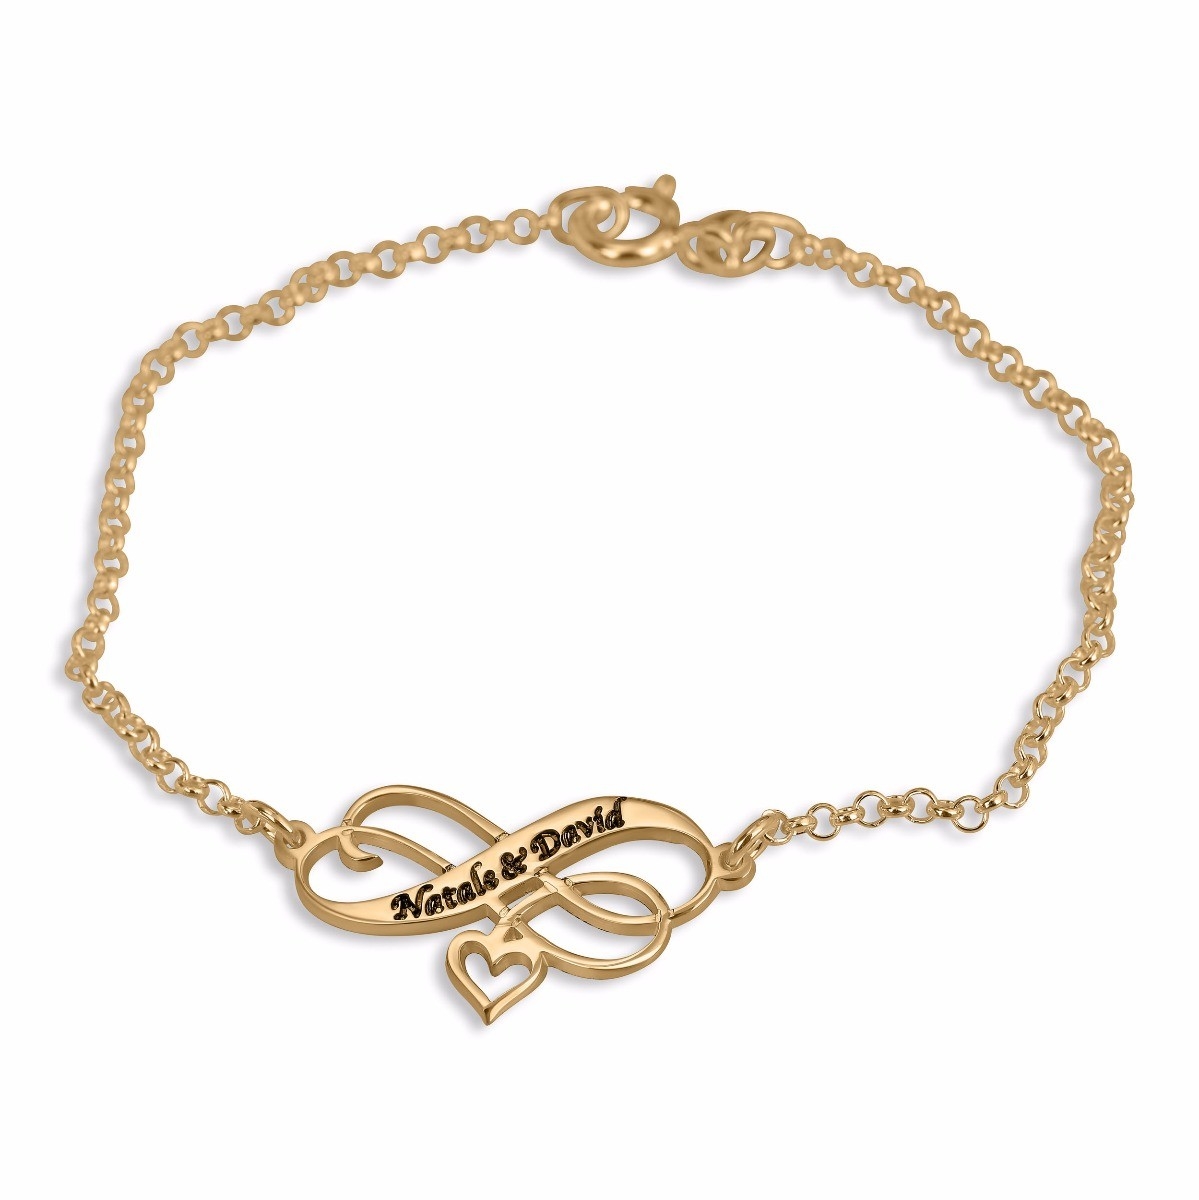 Double Thickness Gold-Plated Infinity Heart Personalized Couples Name Bracelet  - 1